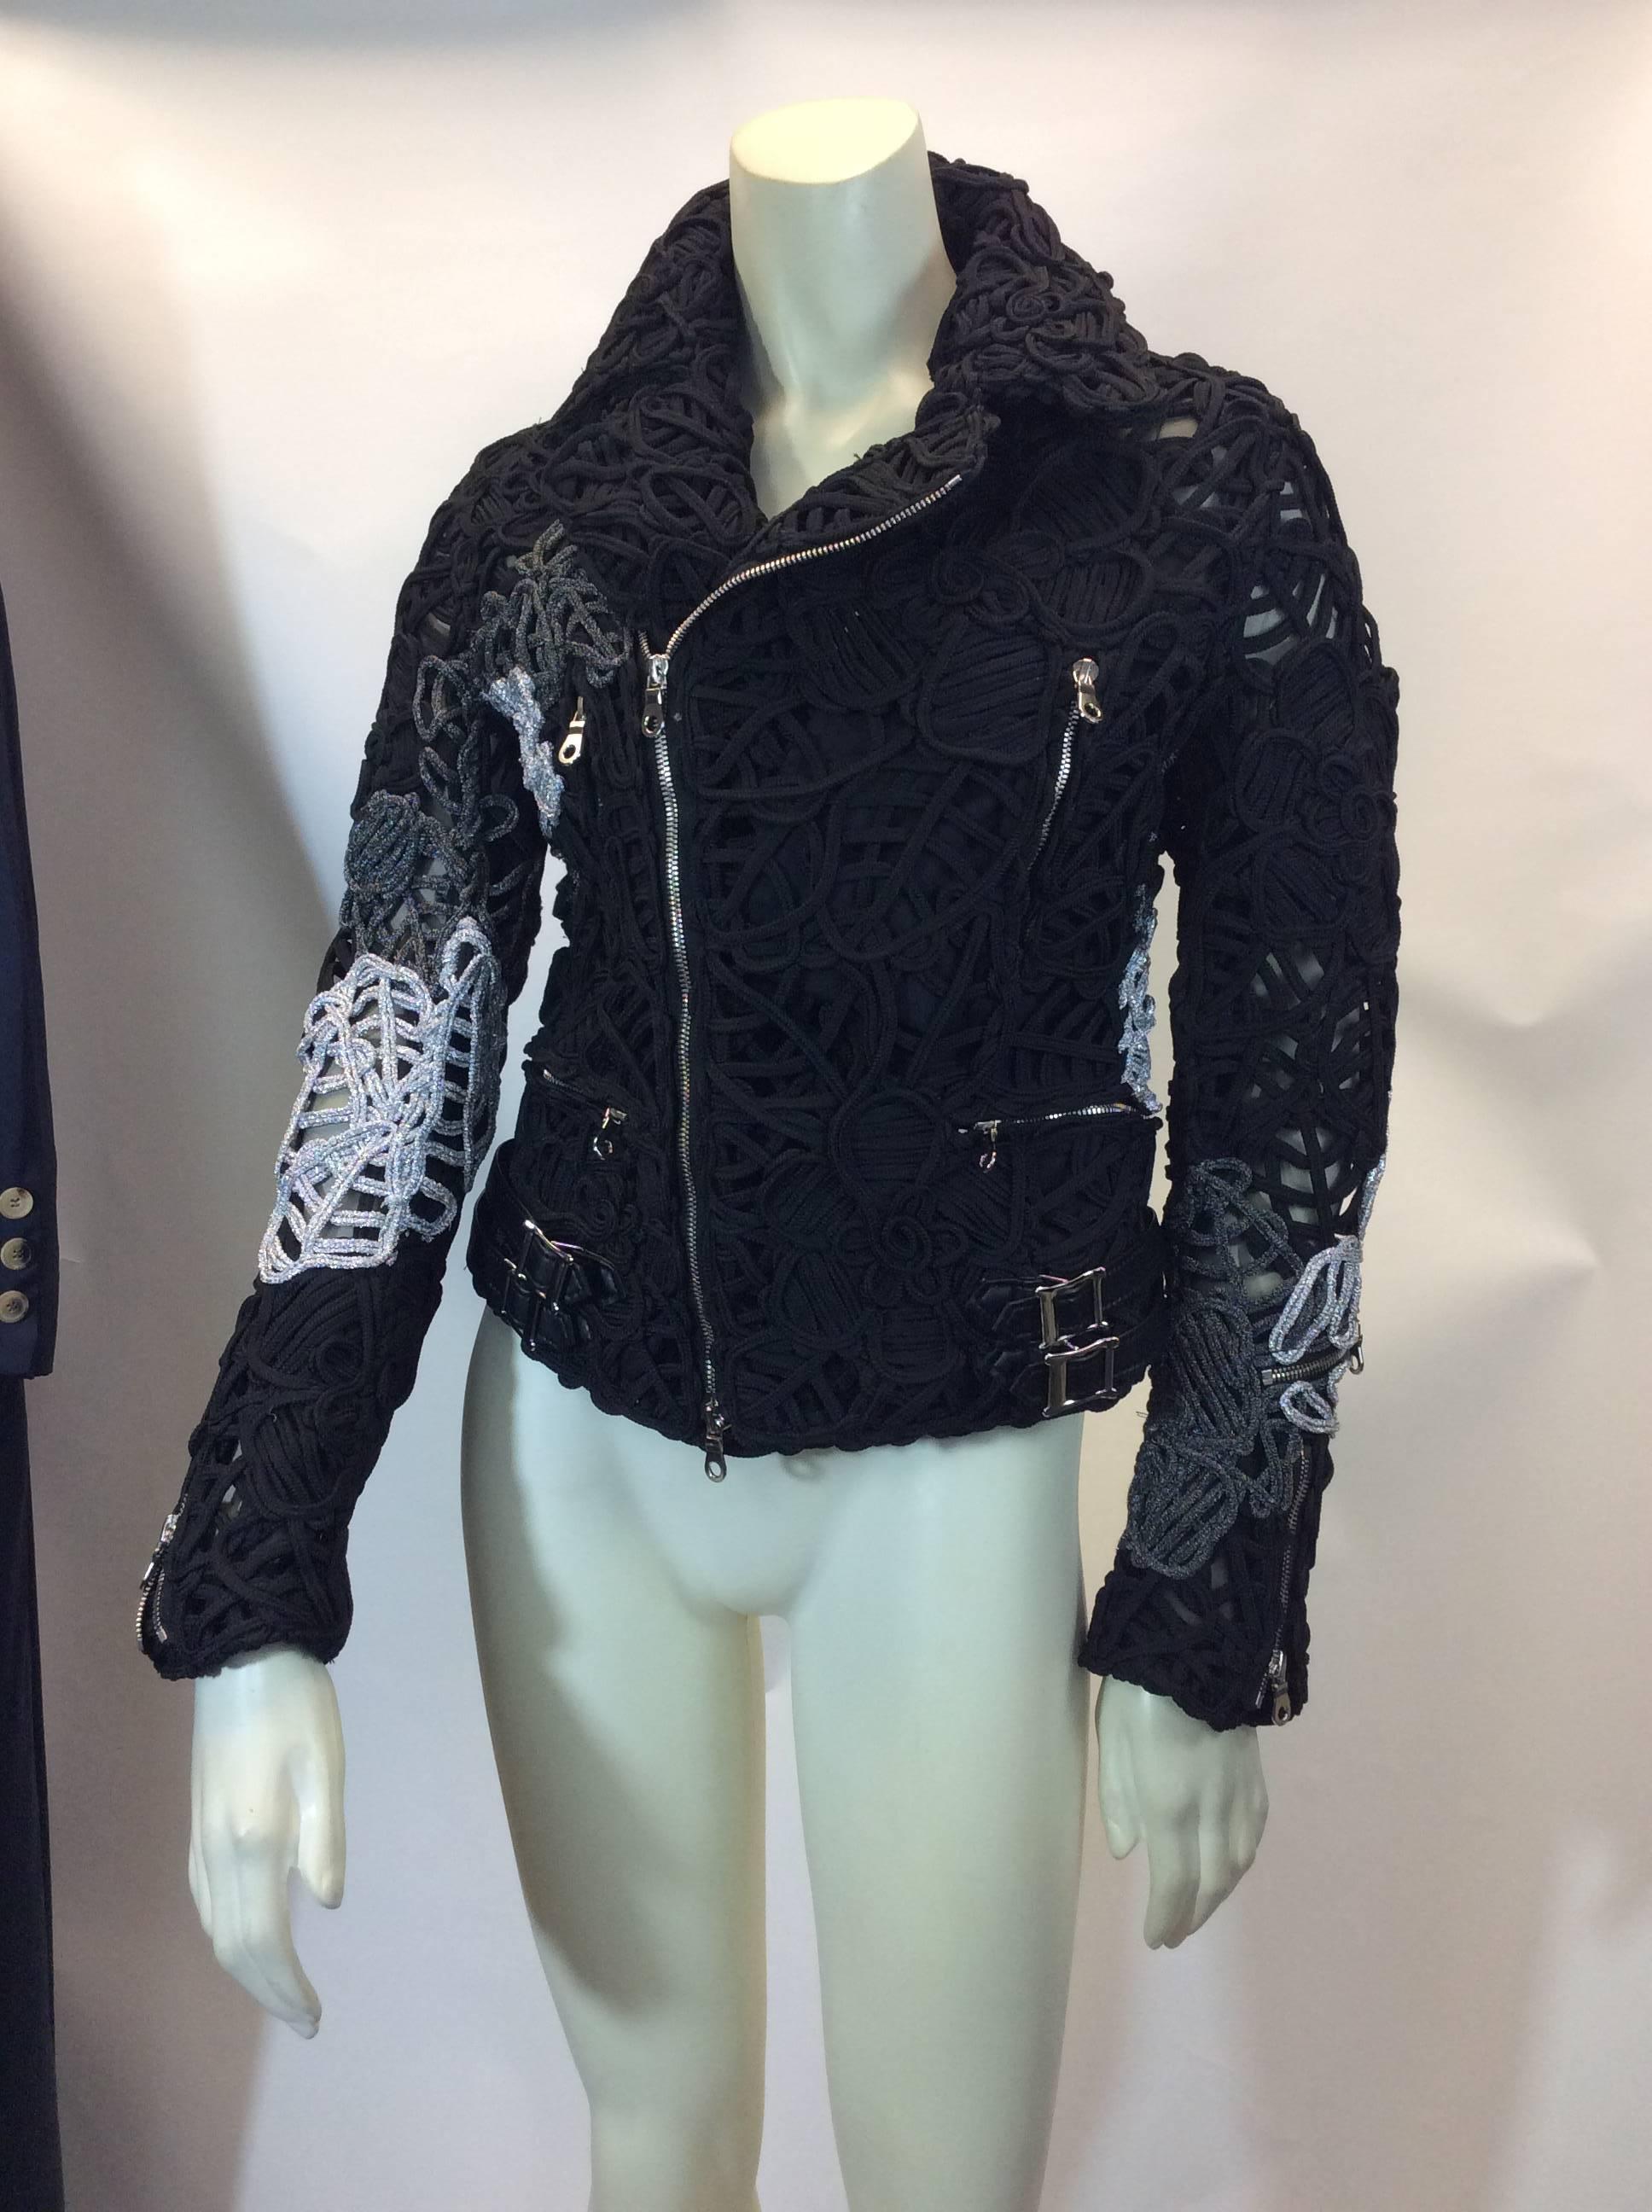 Commes Des Garcons Cord Embroidered Moto Jacket
$699
Size medium
Sheer mesh interior lining
Silver metallic cord with black
Silver toned hardware
